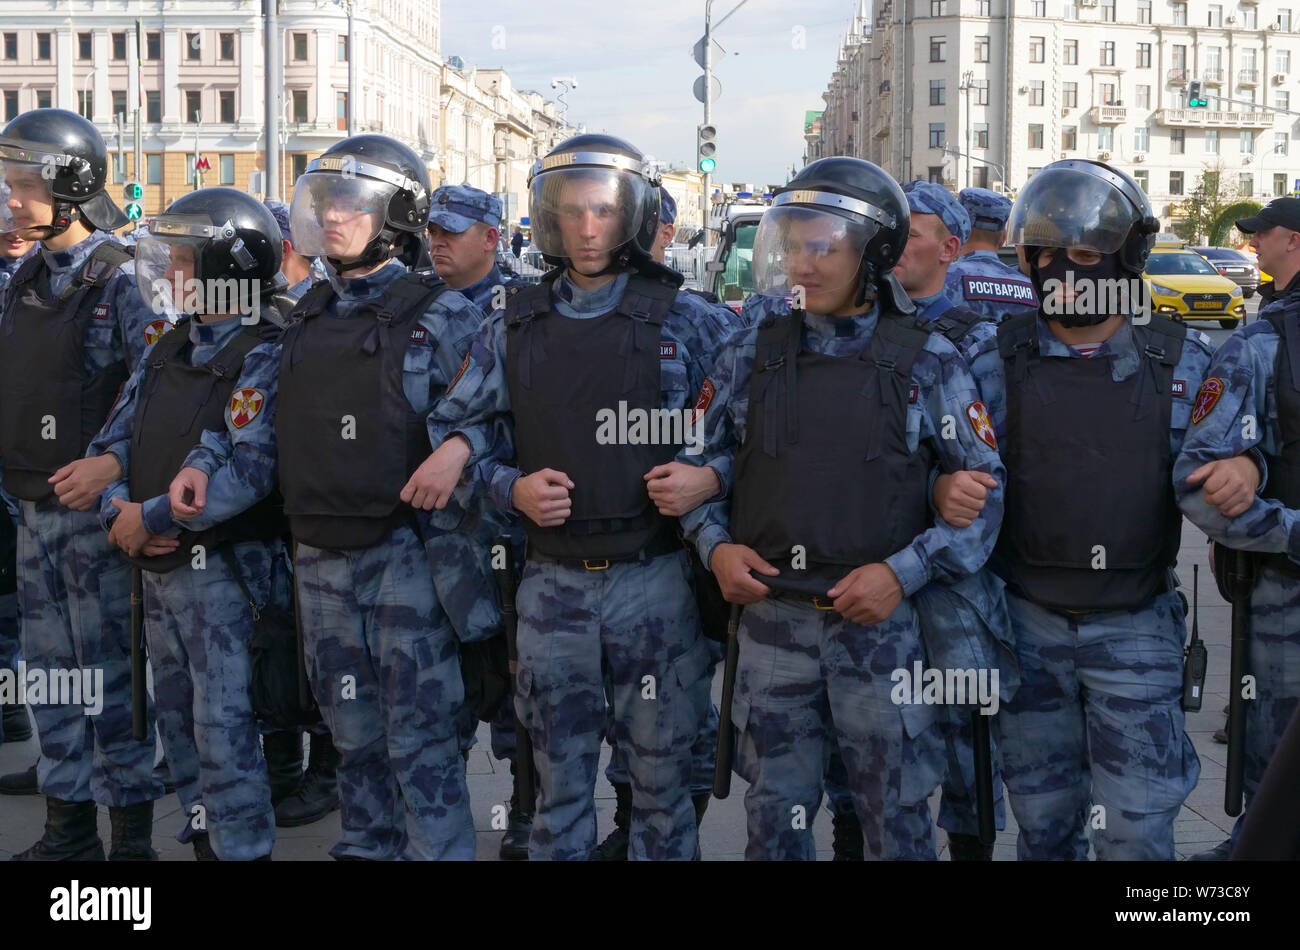 Police officers in protective uniforms Stock Photo